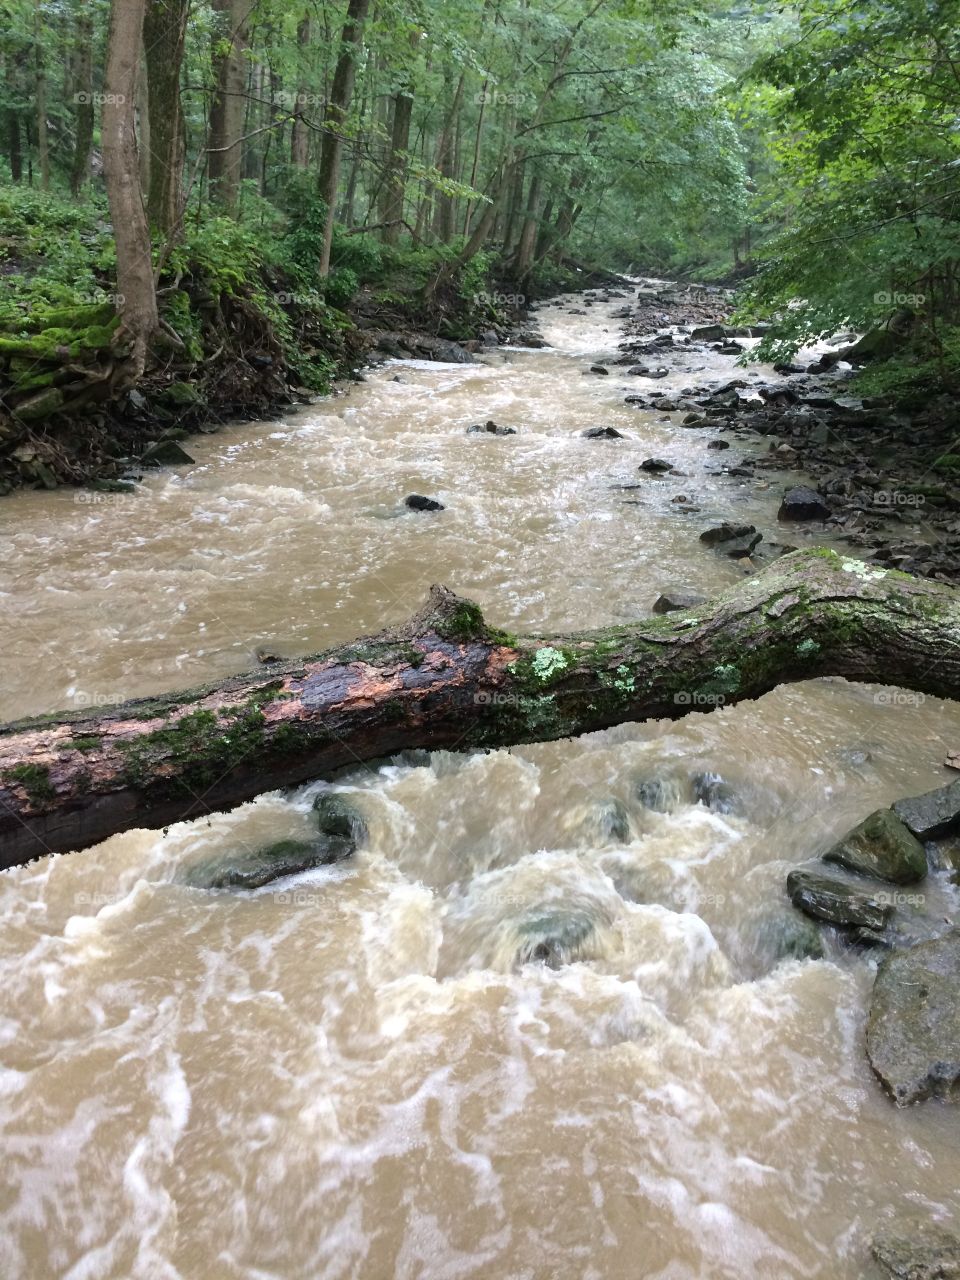 Powerful river on a hiking trail near St. Catharine's Ontario.